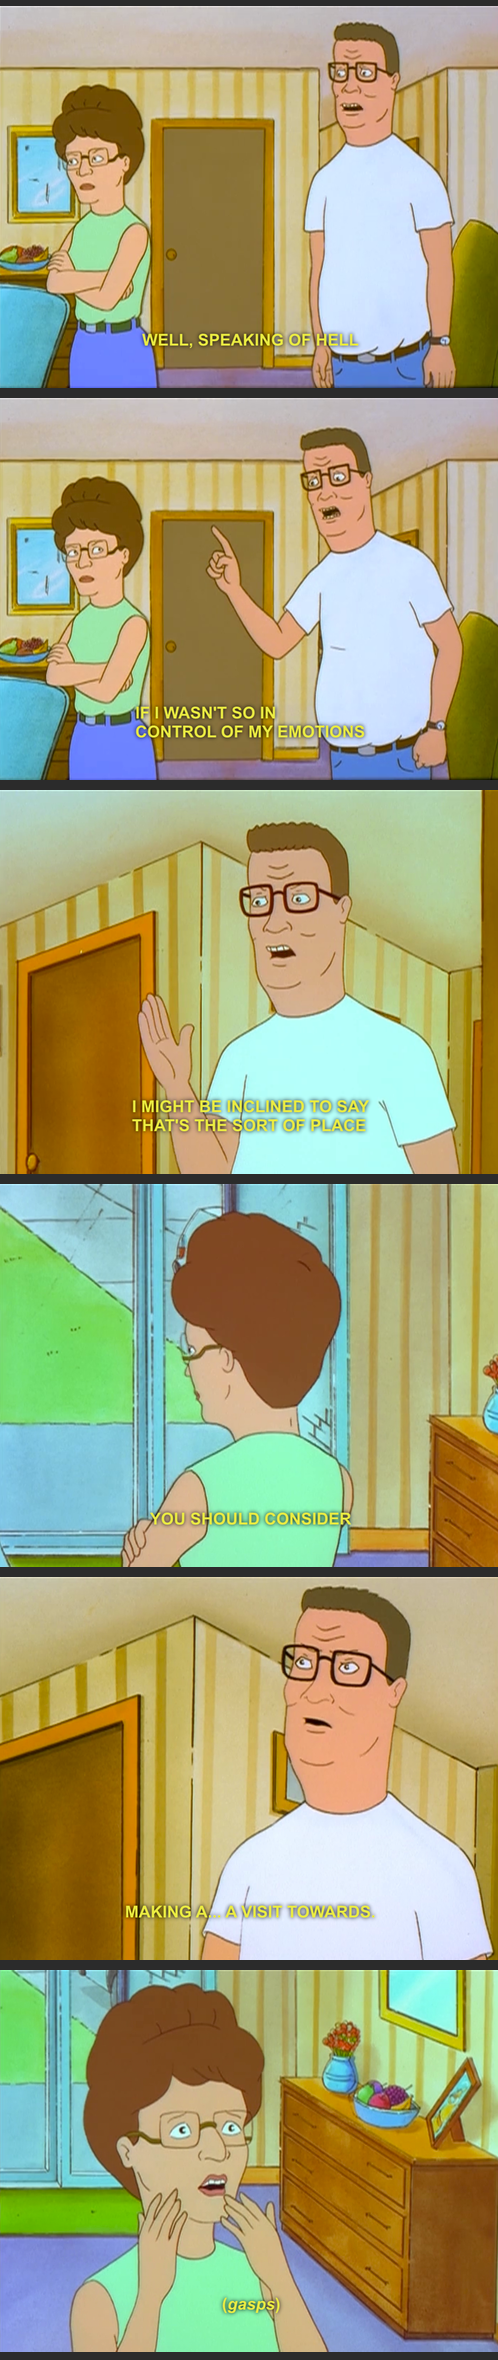 Hank Hill indirectly tells his wife to go to hell.